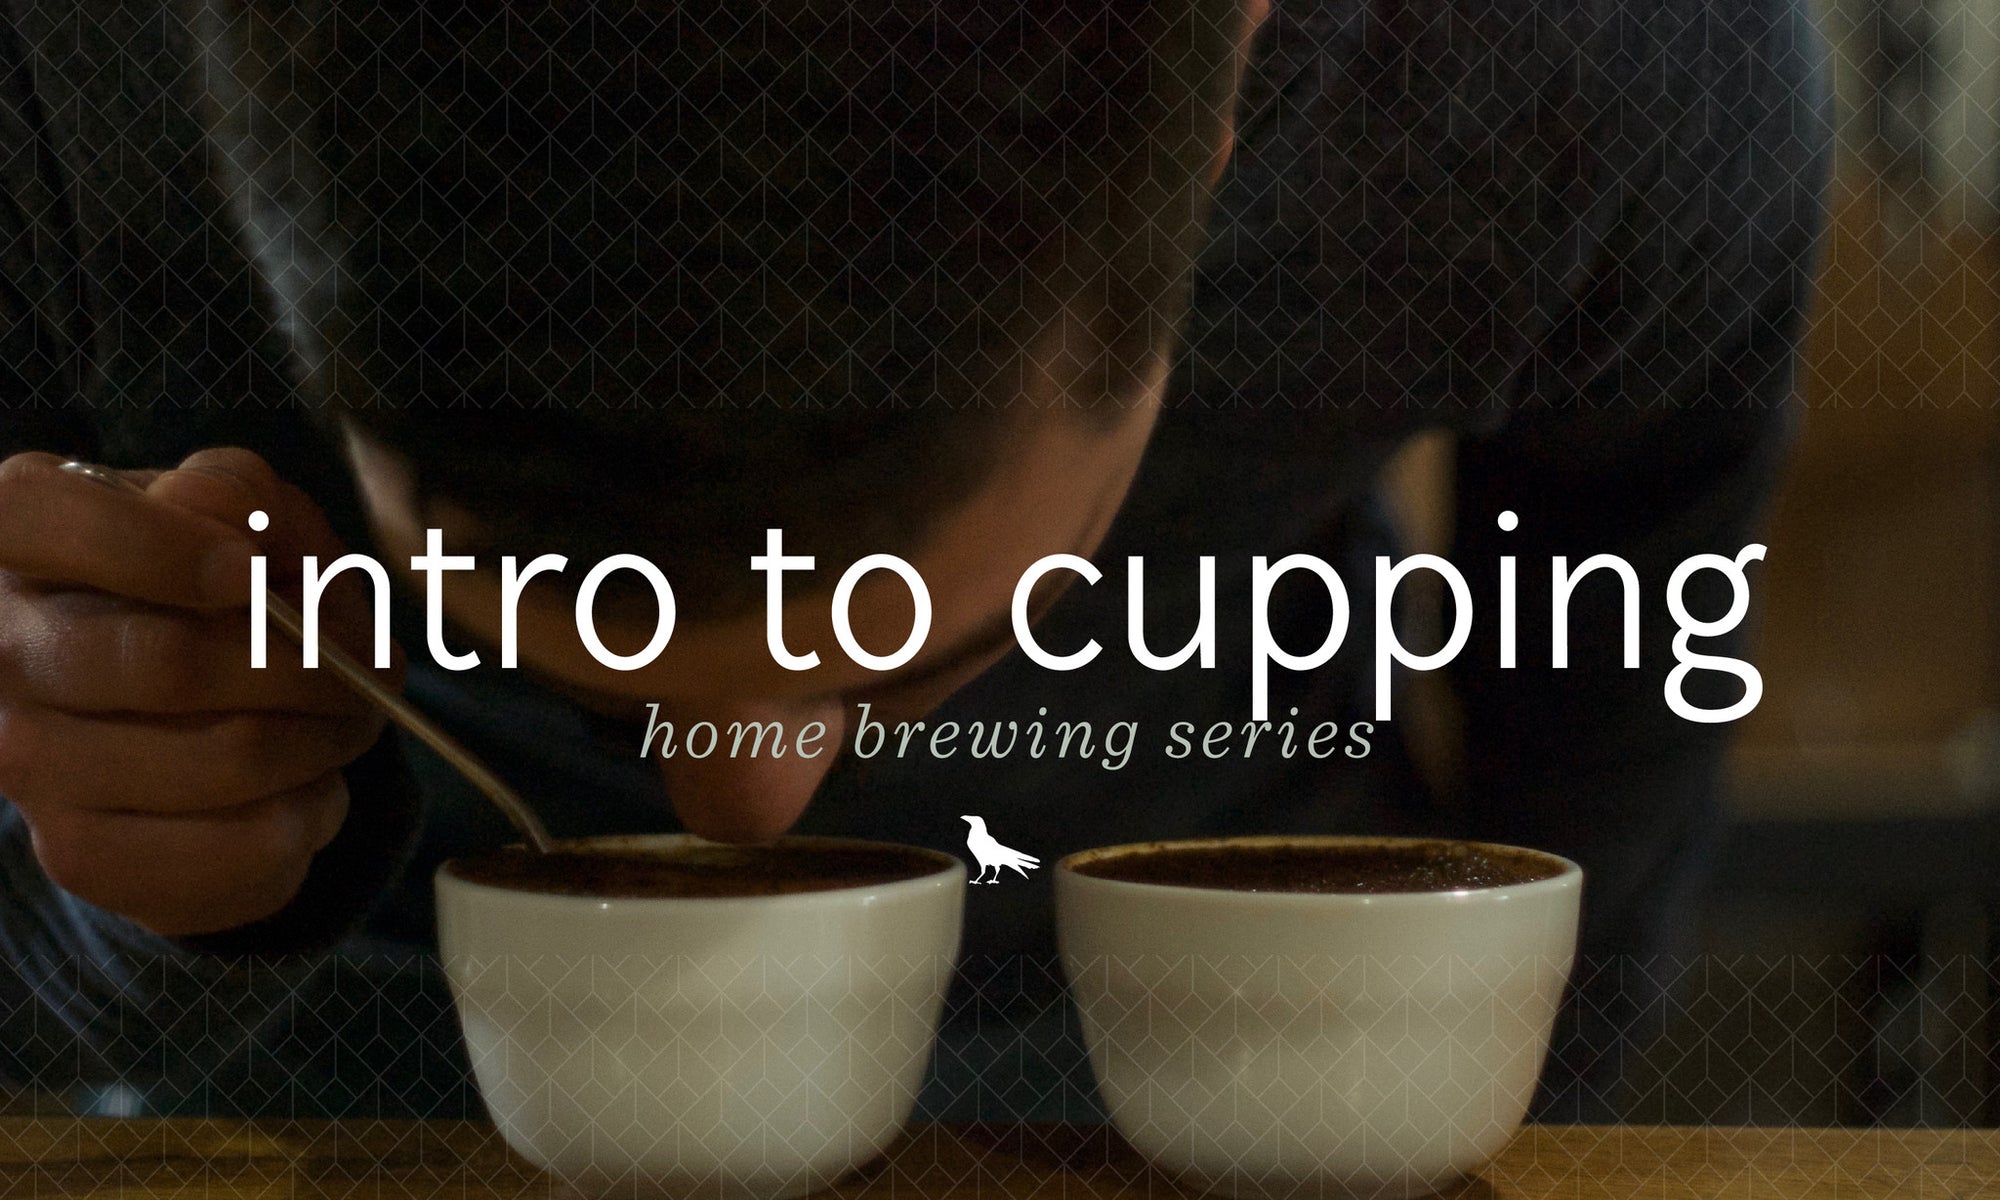 Coffee Cupping, what is it really for?